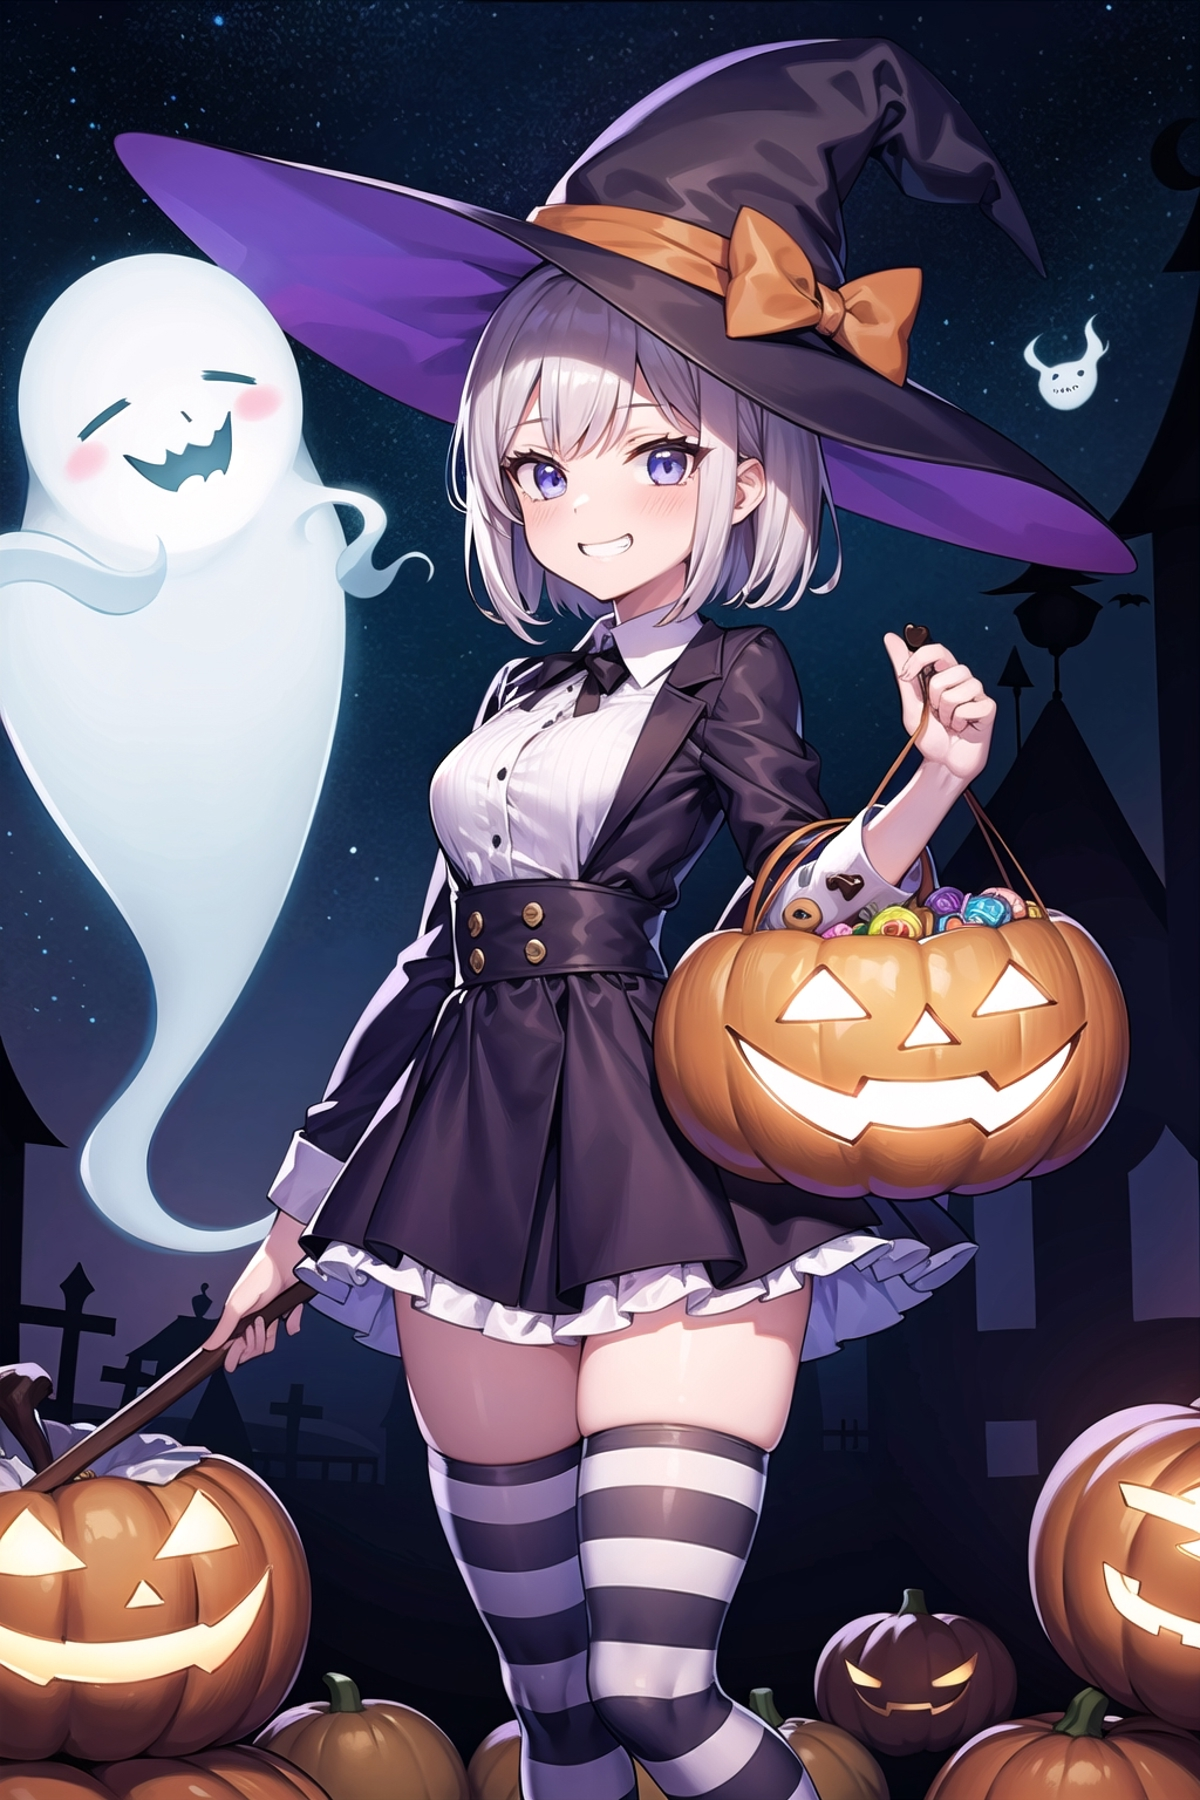 Halloween Cuteness Overload image by Kybalico